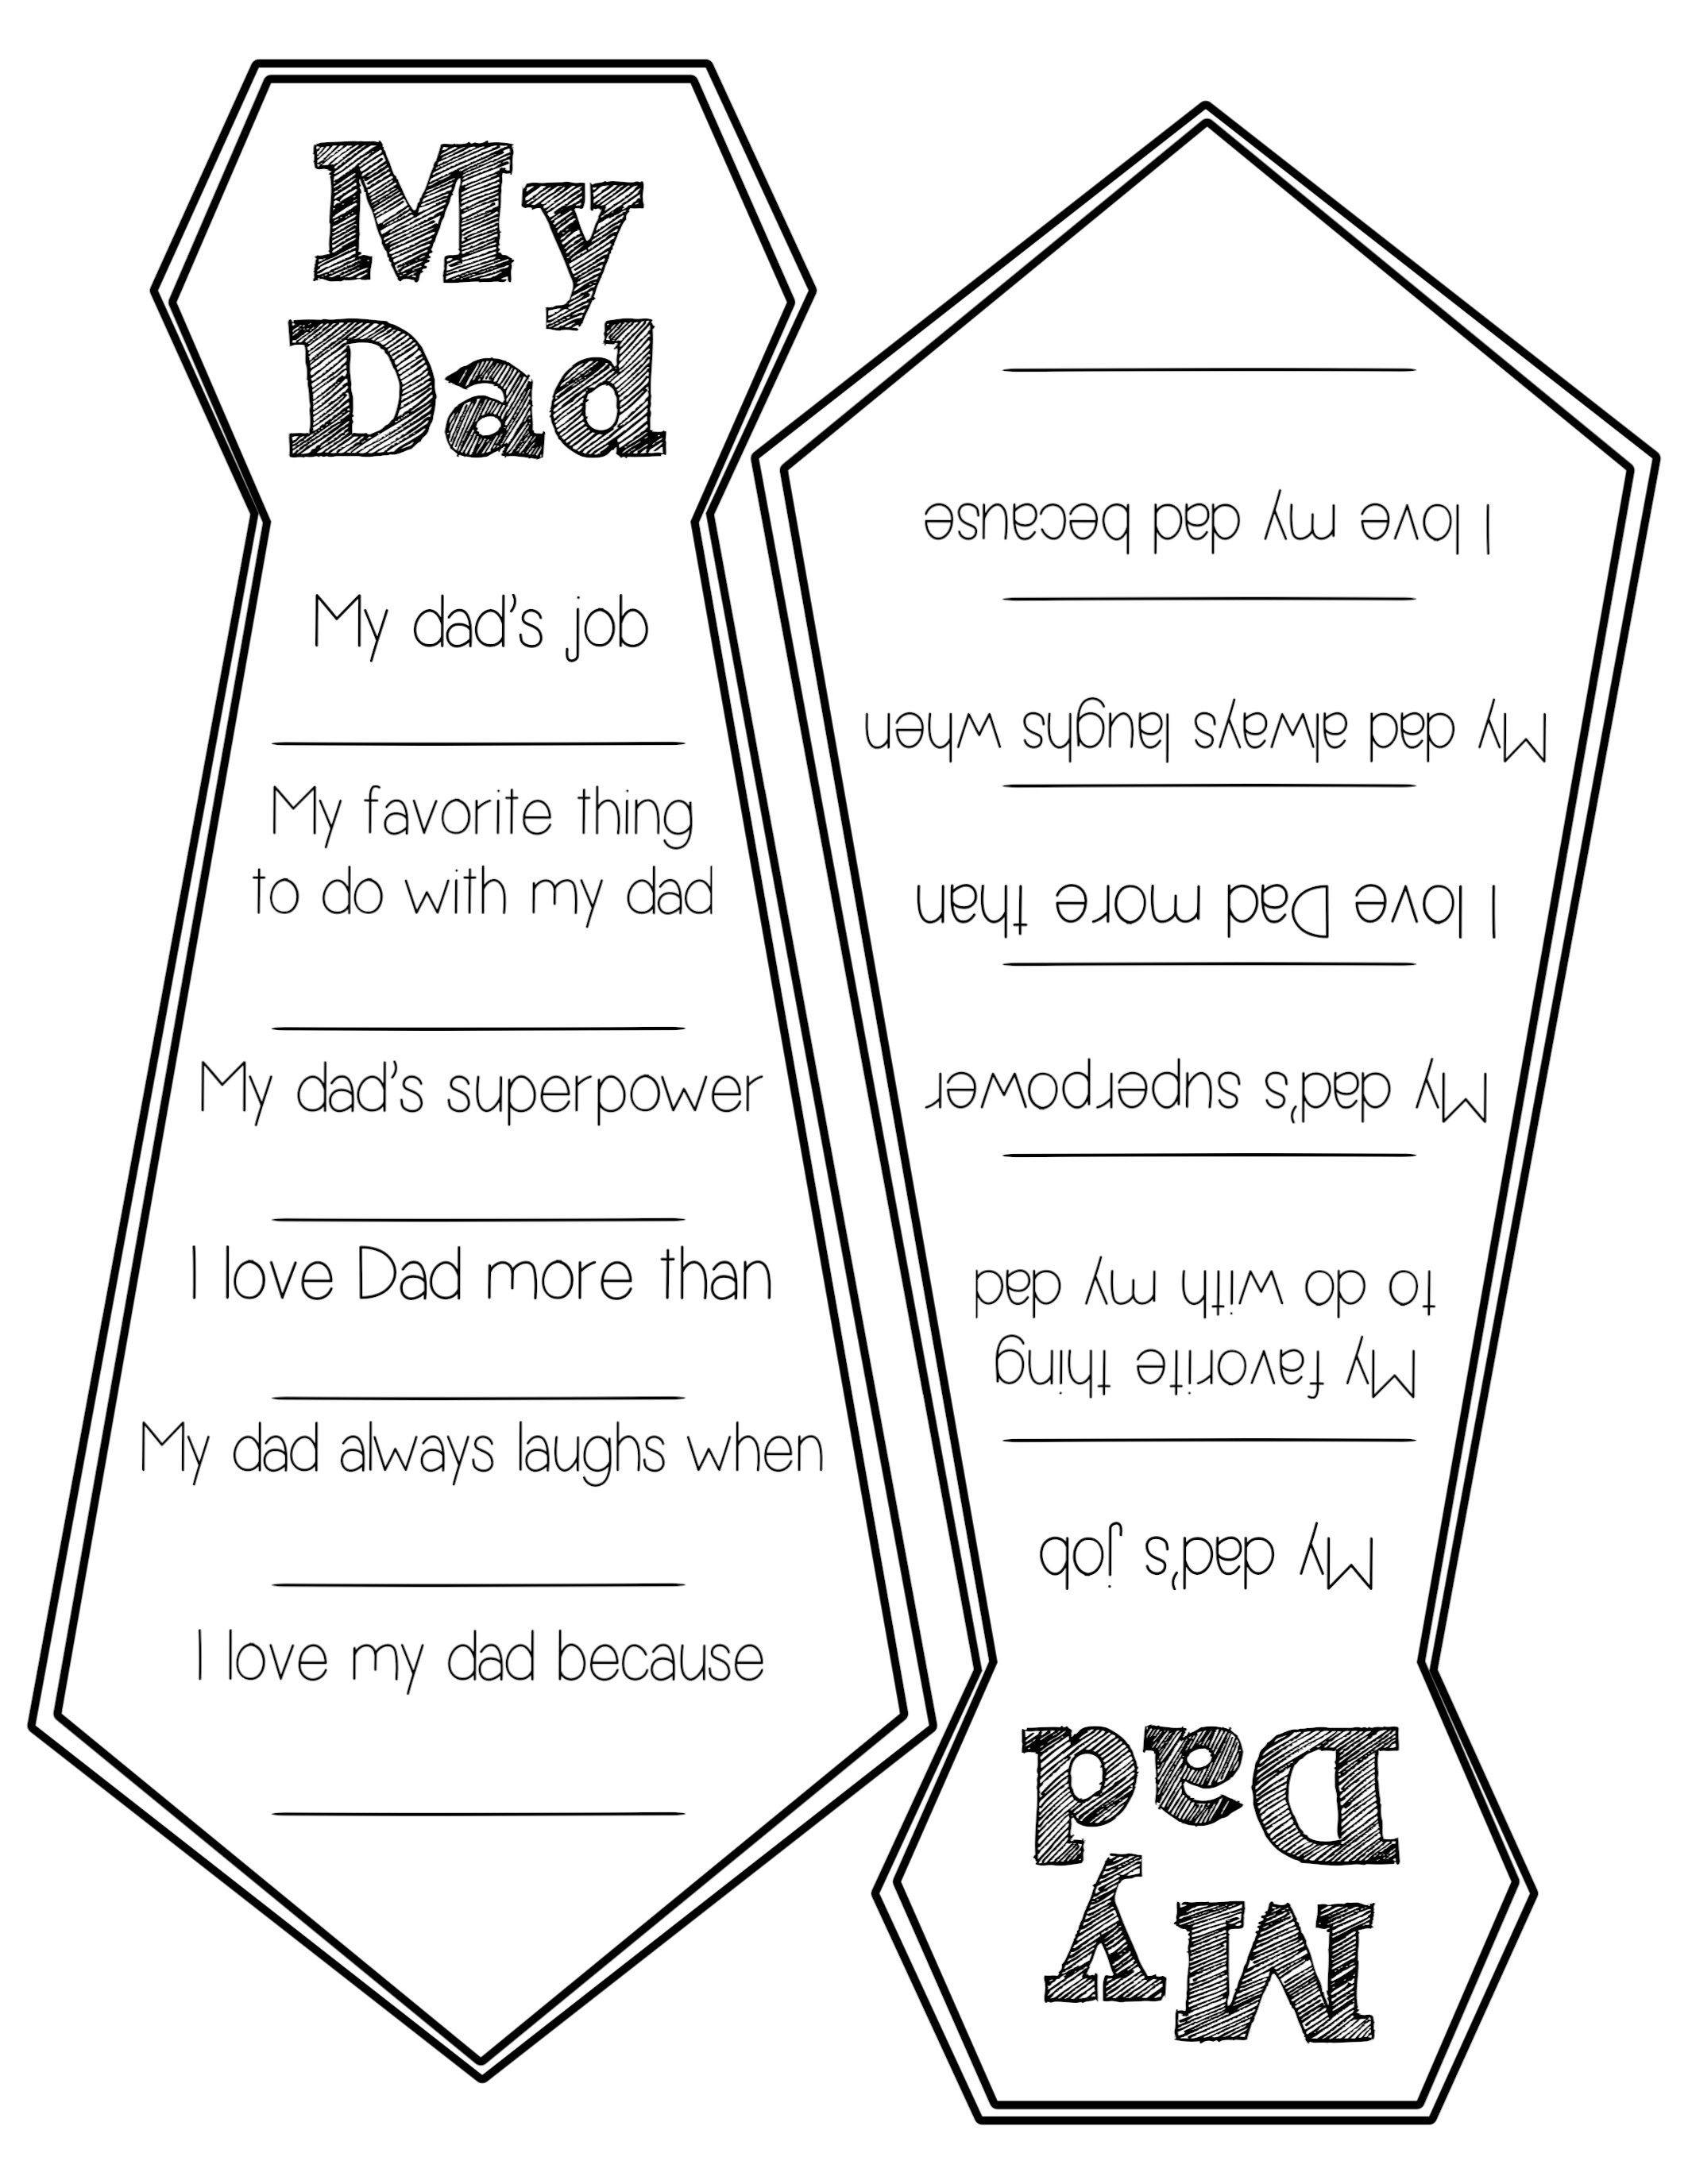 Father&amp;#039;s Day Free Printable Cards | Dads | Father&amp;#039;s Day Diy, Fathers - Free Printable Father&amp;#039;s Day Card From Wife To Husband